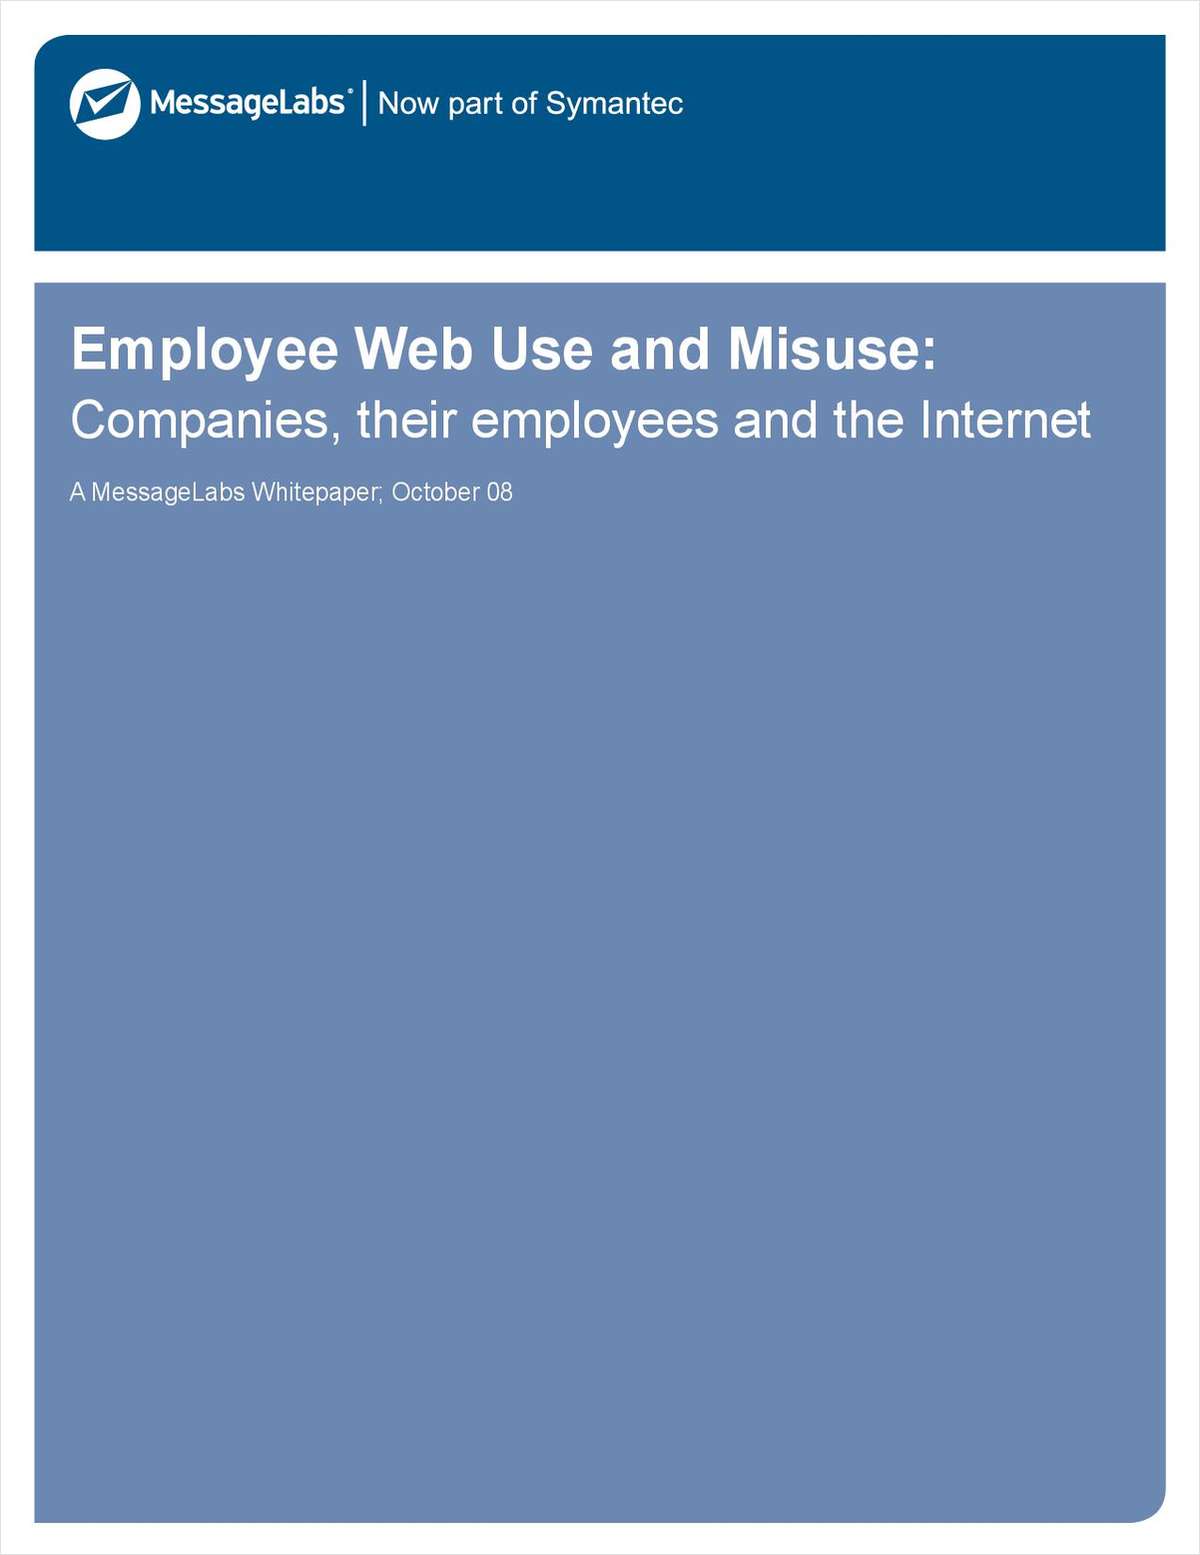 Employee Web Use and Misuse: Companies, Their Employees and the Internet